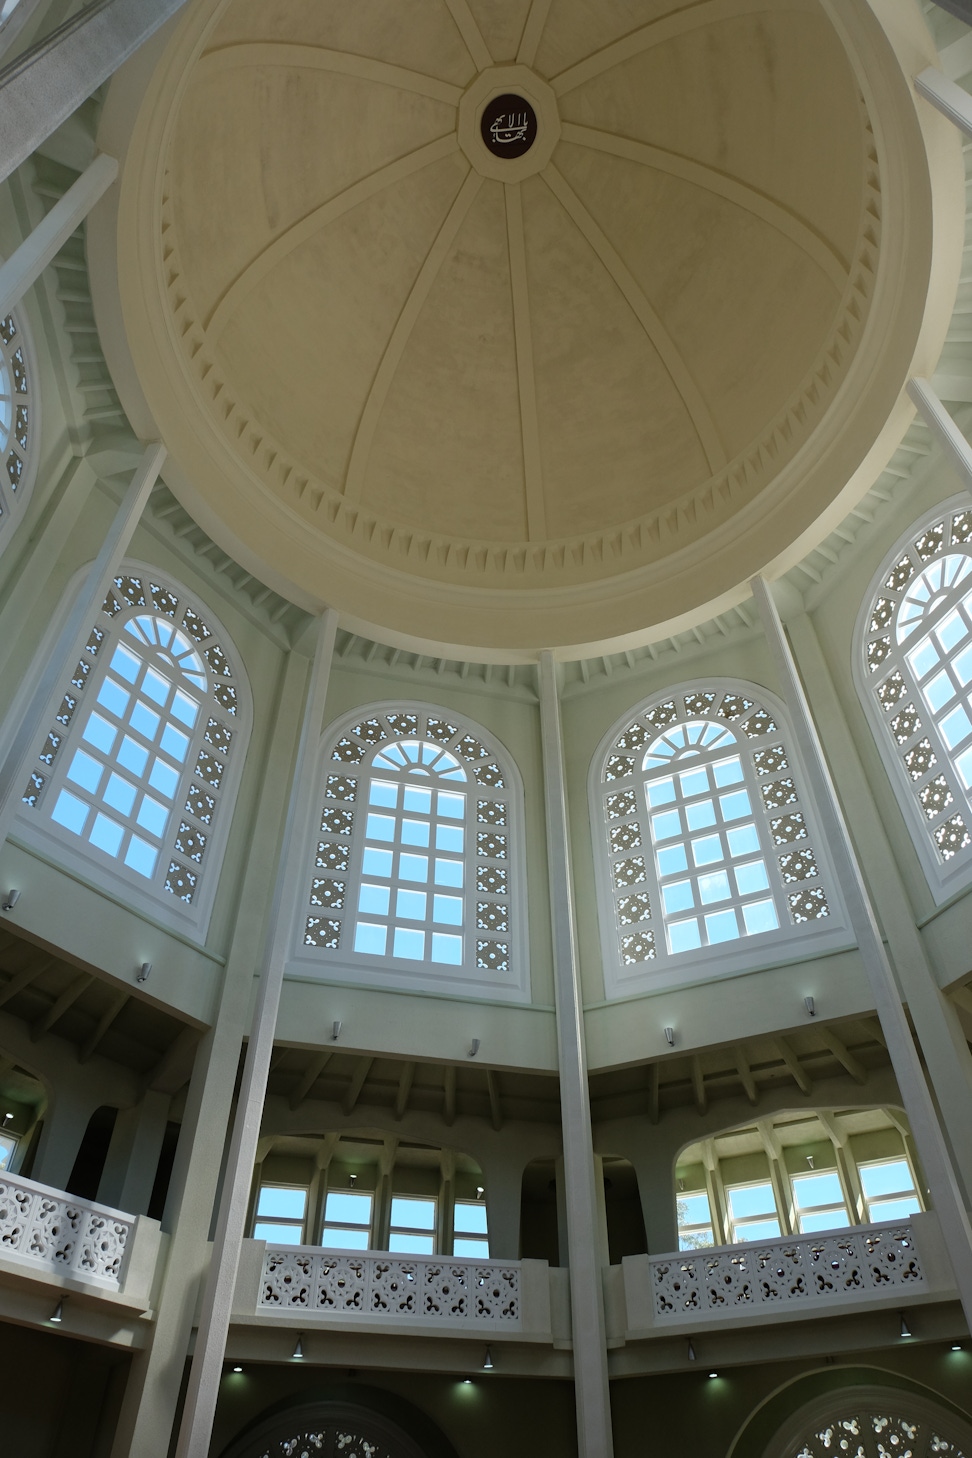 View of the interior of the dome of the Continental Bahá’í House of Worship of Australasia (Sydney, Australia)